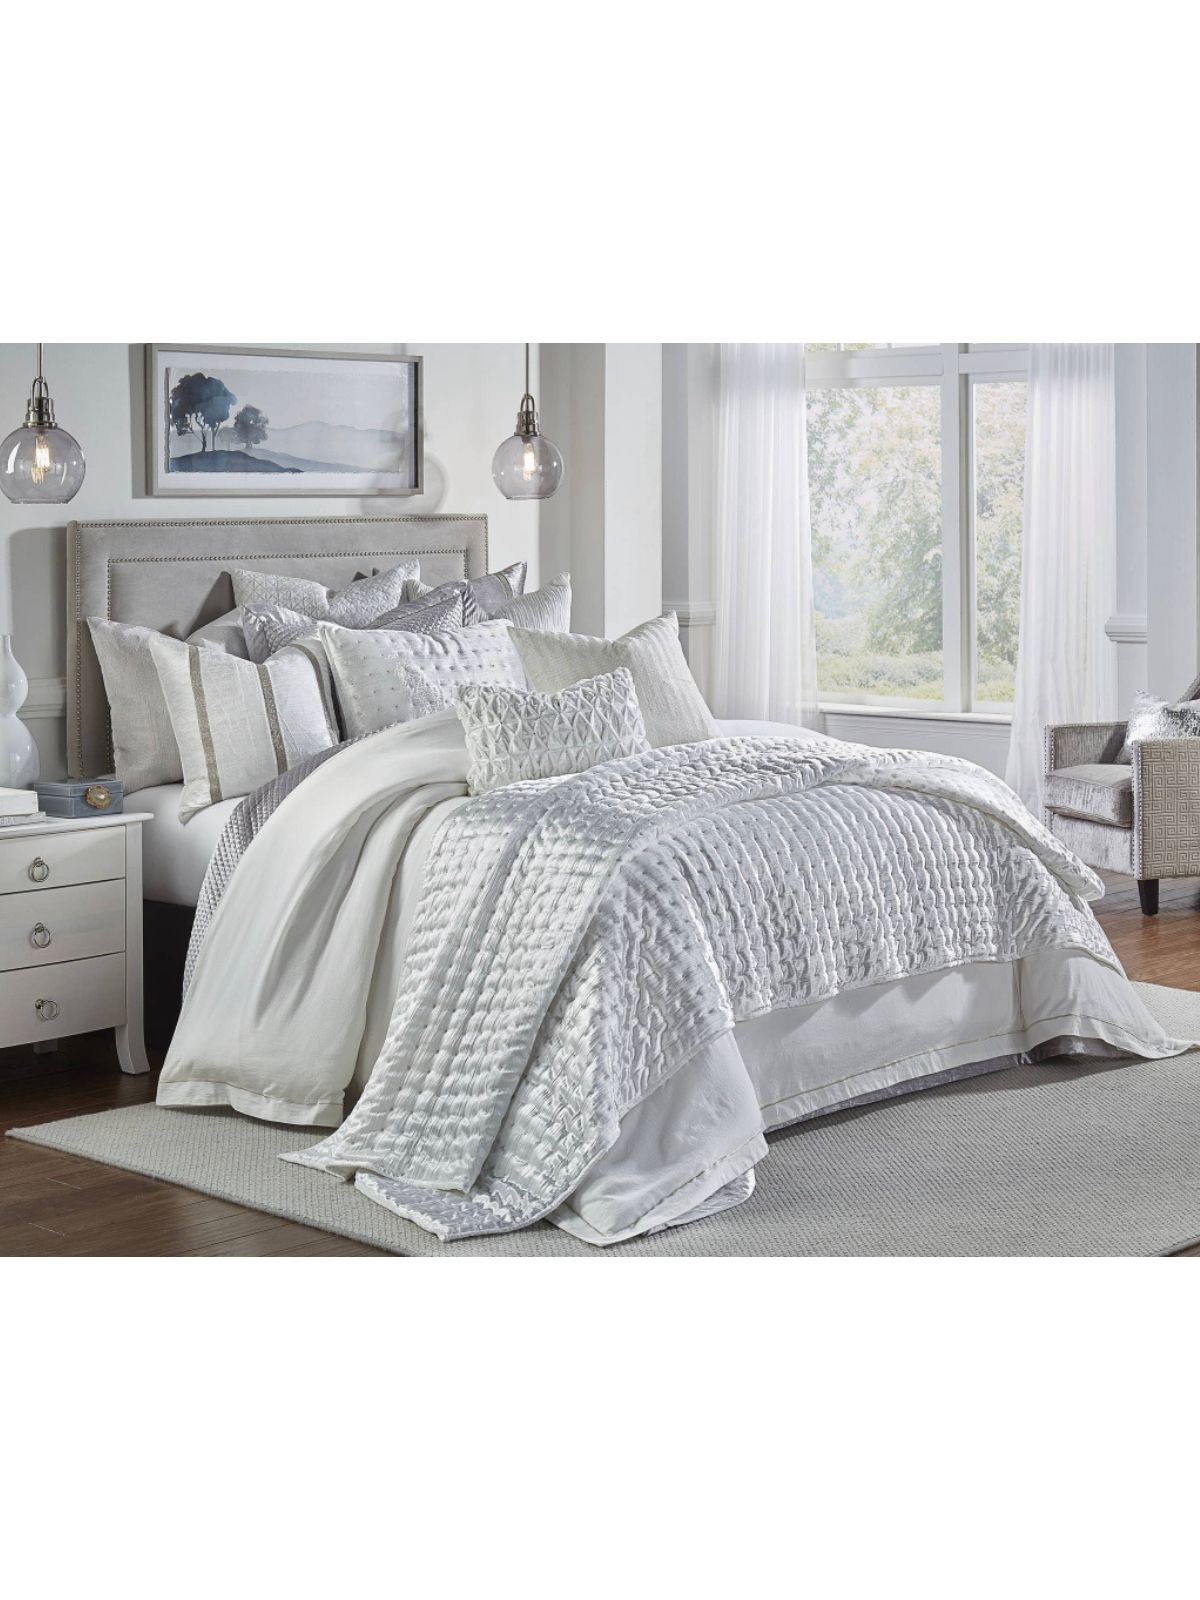 The Prato quilt features a crushed ivory fabric with metallic dots embroidered and is quilted in a square pattern. This cozy layer is the perfect addition to any room. 